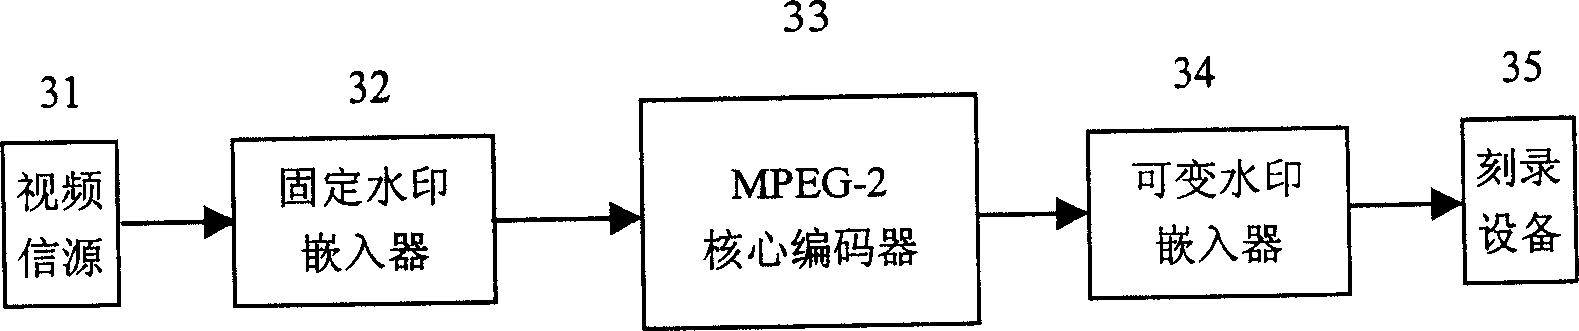 Video frequency data copying control system and method